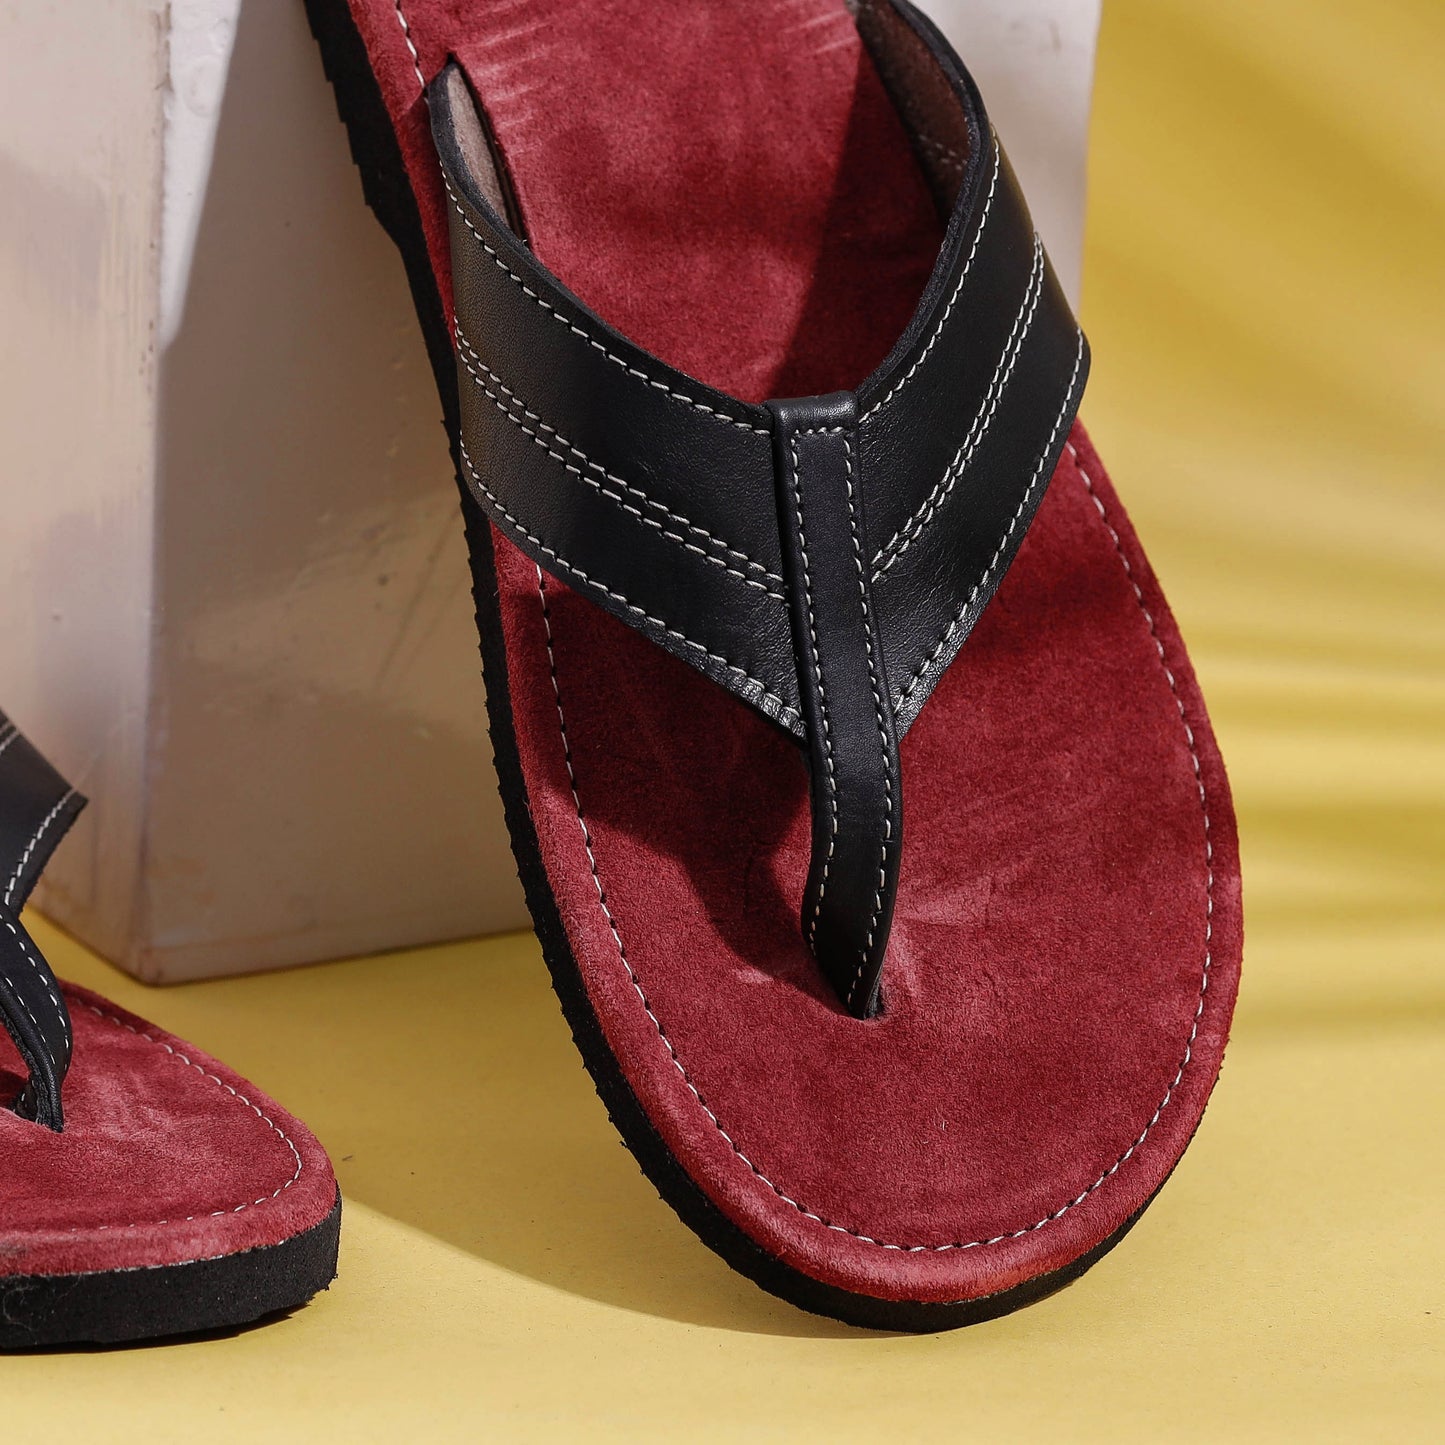 Black & Maroon Handcrafted Men's Leather Slippers with Suede